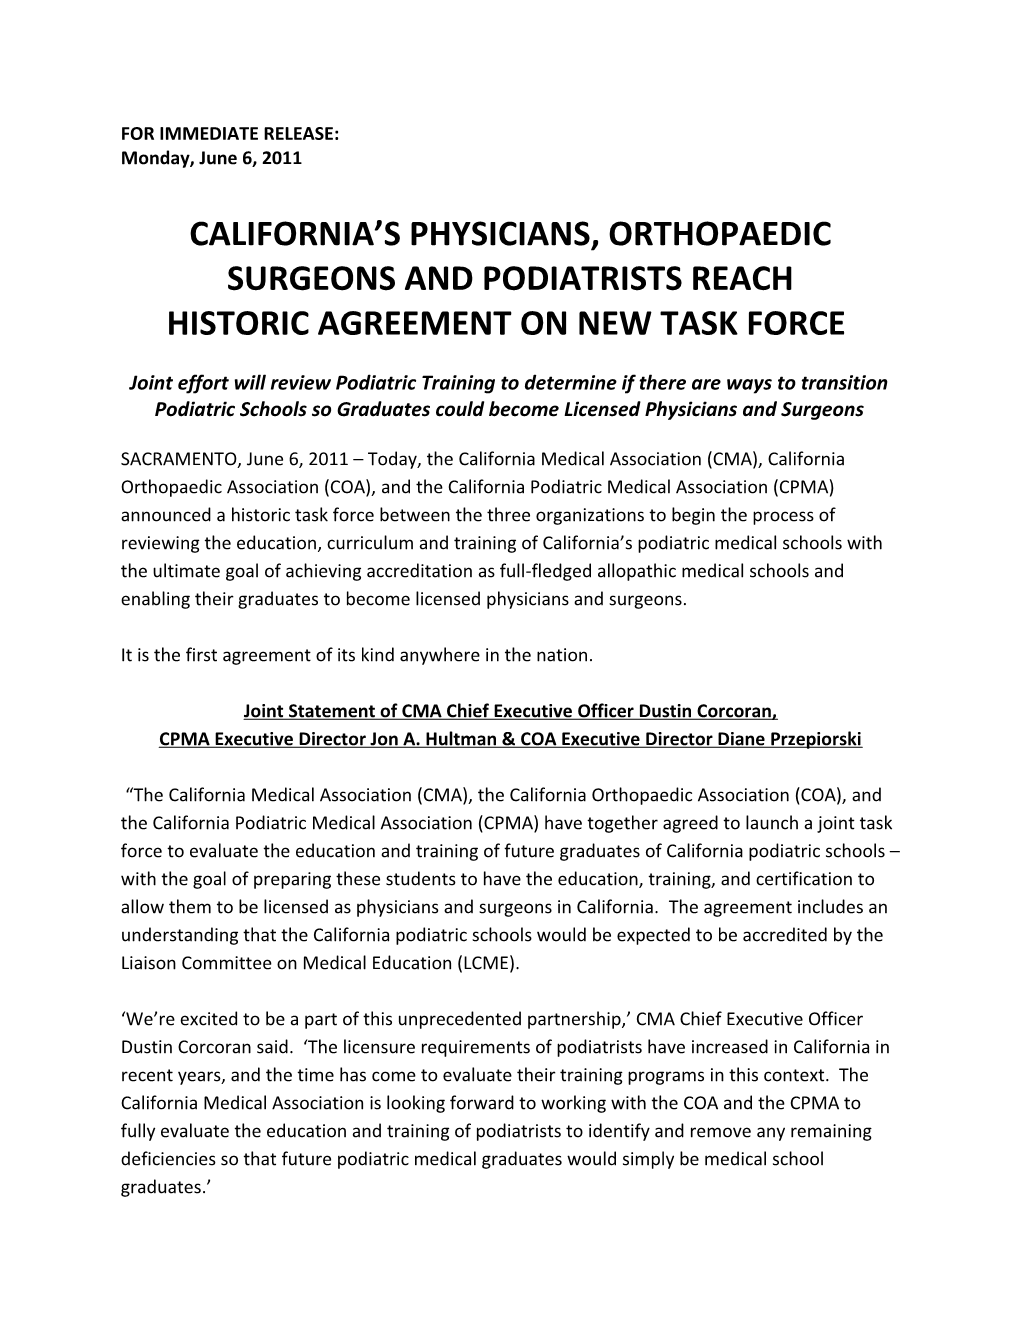 California S Physicians, Orthopaedic Surgeons and Podiatrists Reach